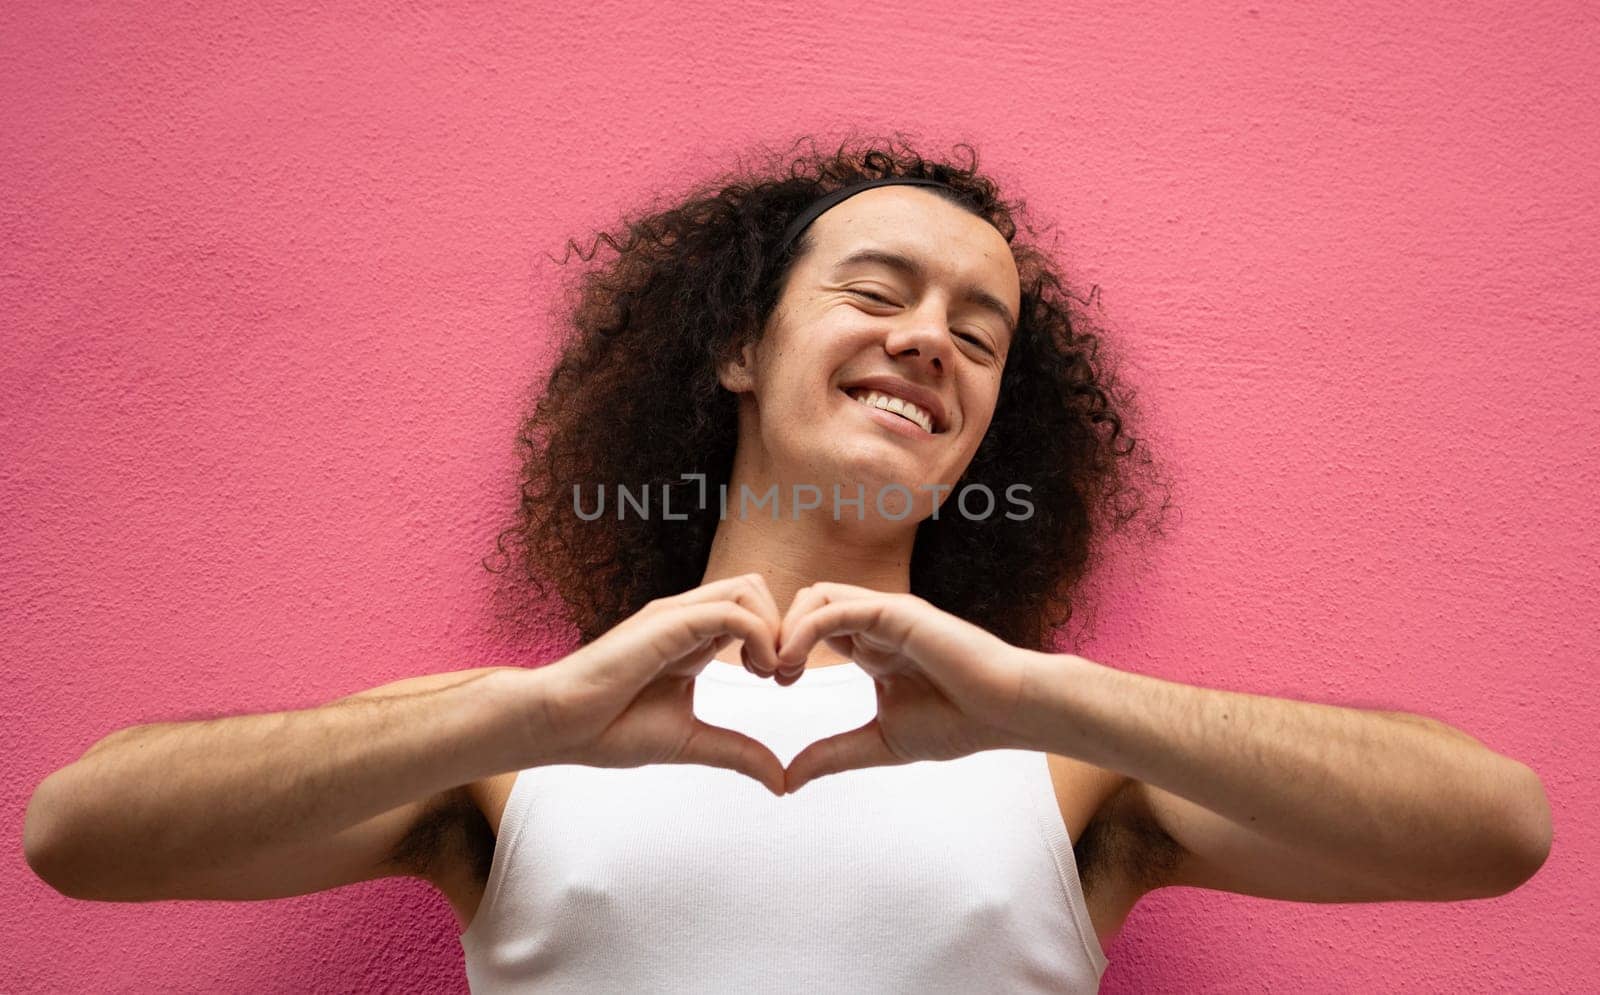 Gay man with curly hair is smiling and making a heart shape with his hands isolated on pink background.